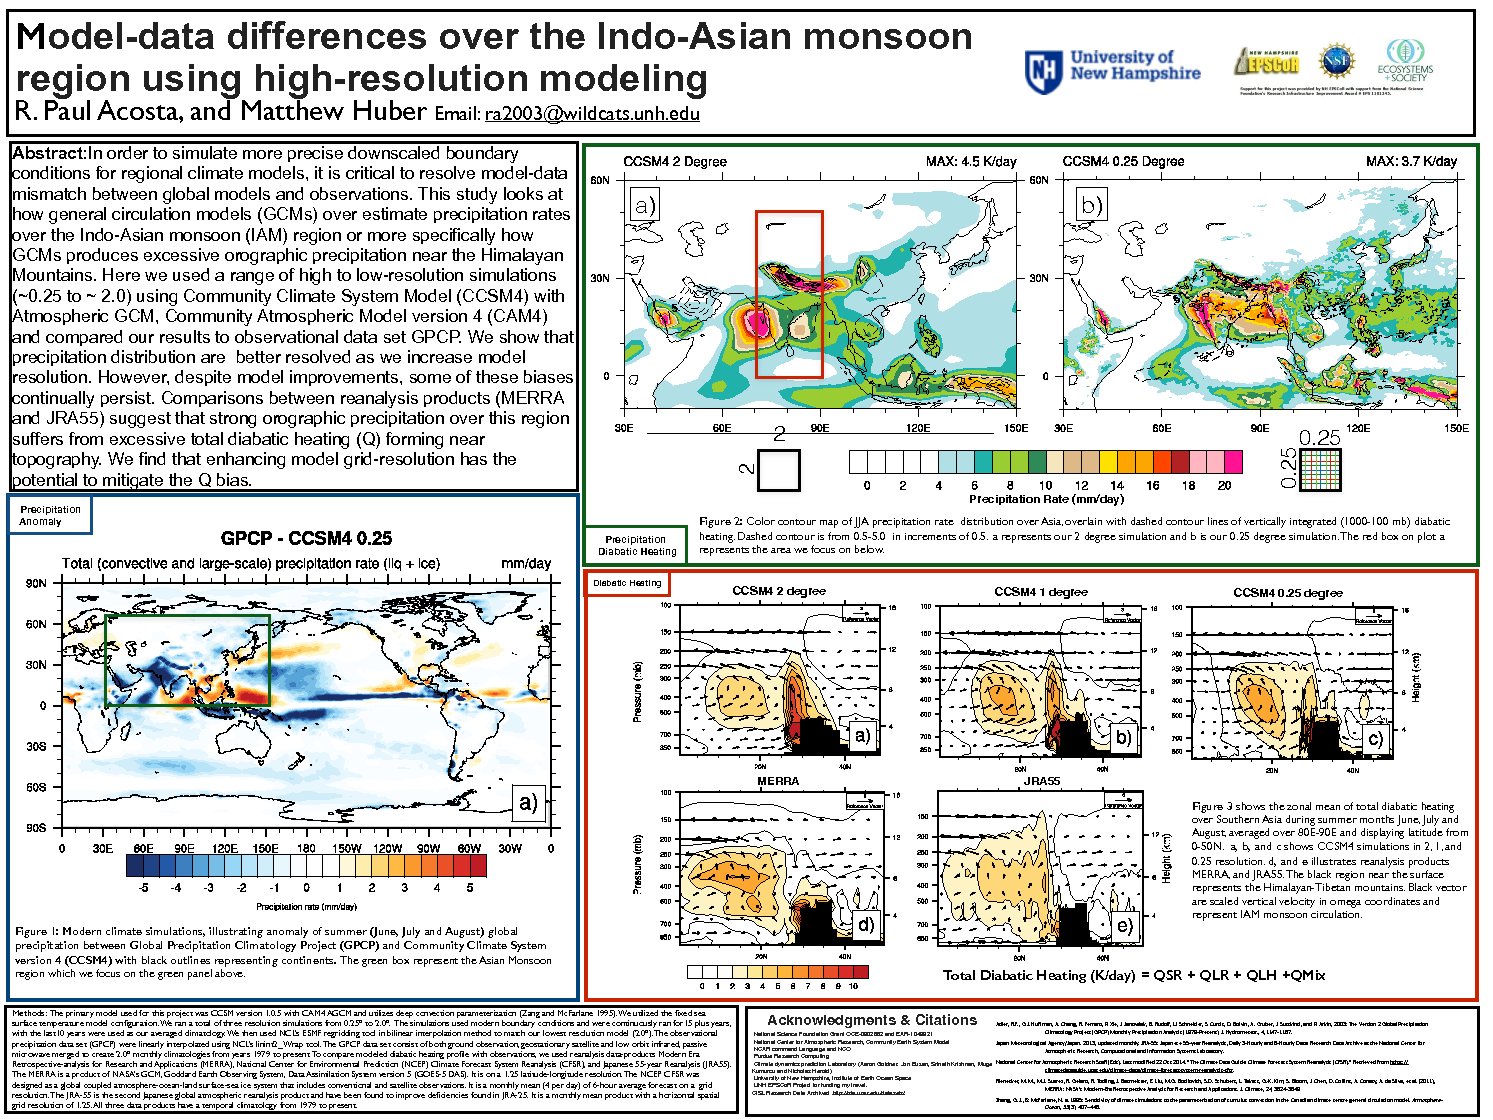 Model-Data Differences Over The Indo-Asian Monsoon Region Using High-Resolution Modeling by ra2003